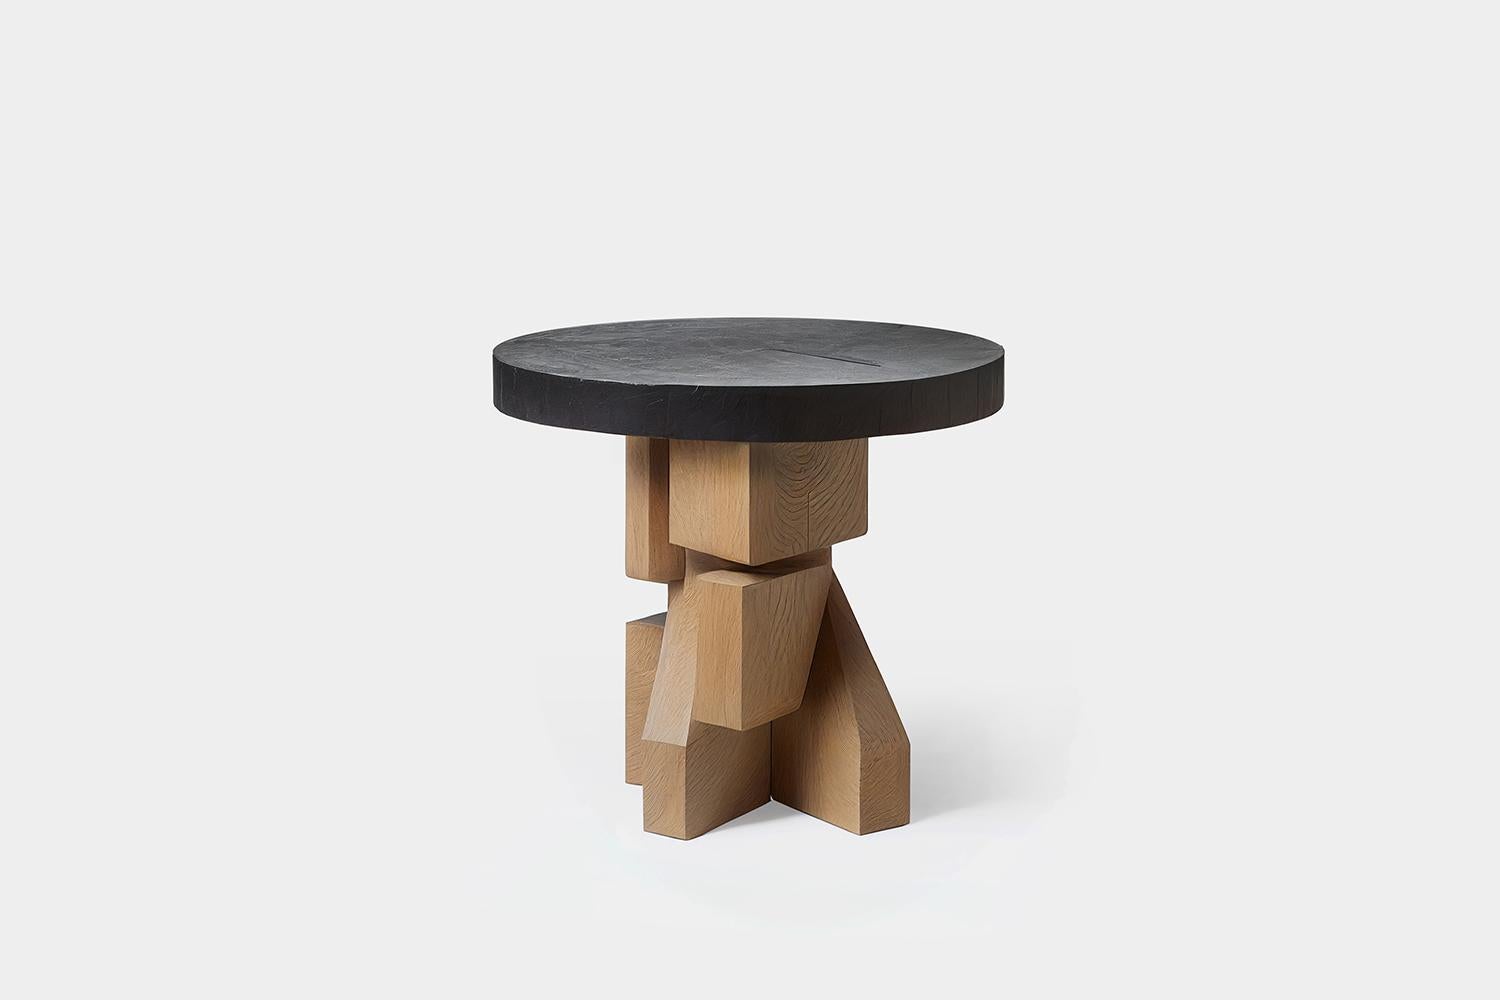 Hand-crafted solid thick oak side table with faceted base and black round table top. 
Product made to order; some variances may apply to the final piece. 

——

NONO is a Mexican design brand with more than 10 years of experience dedicated to the